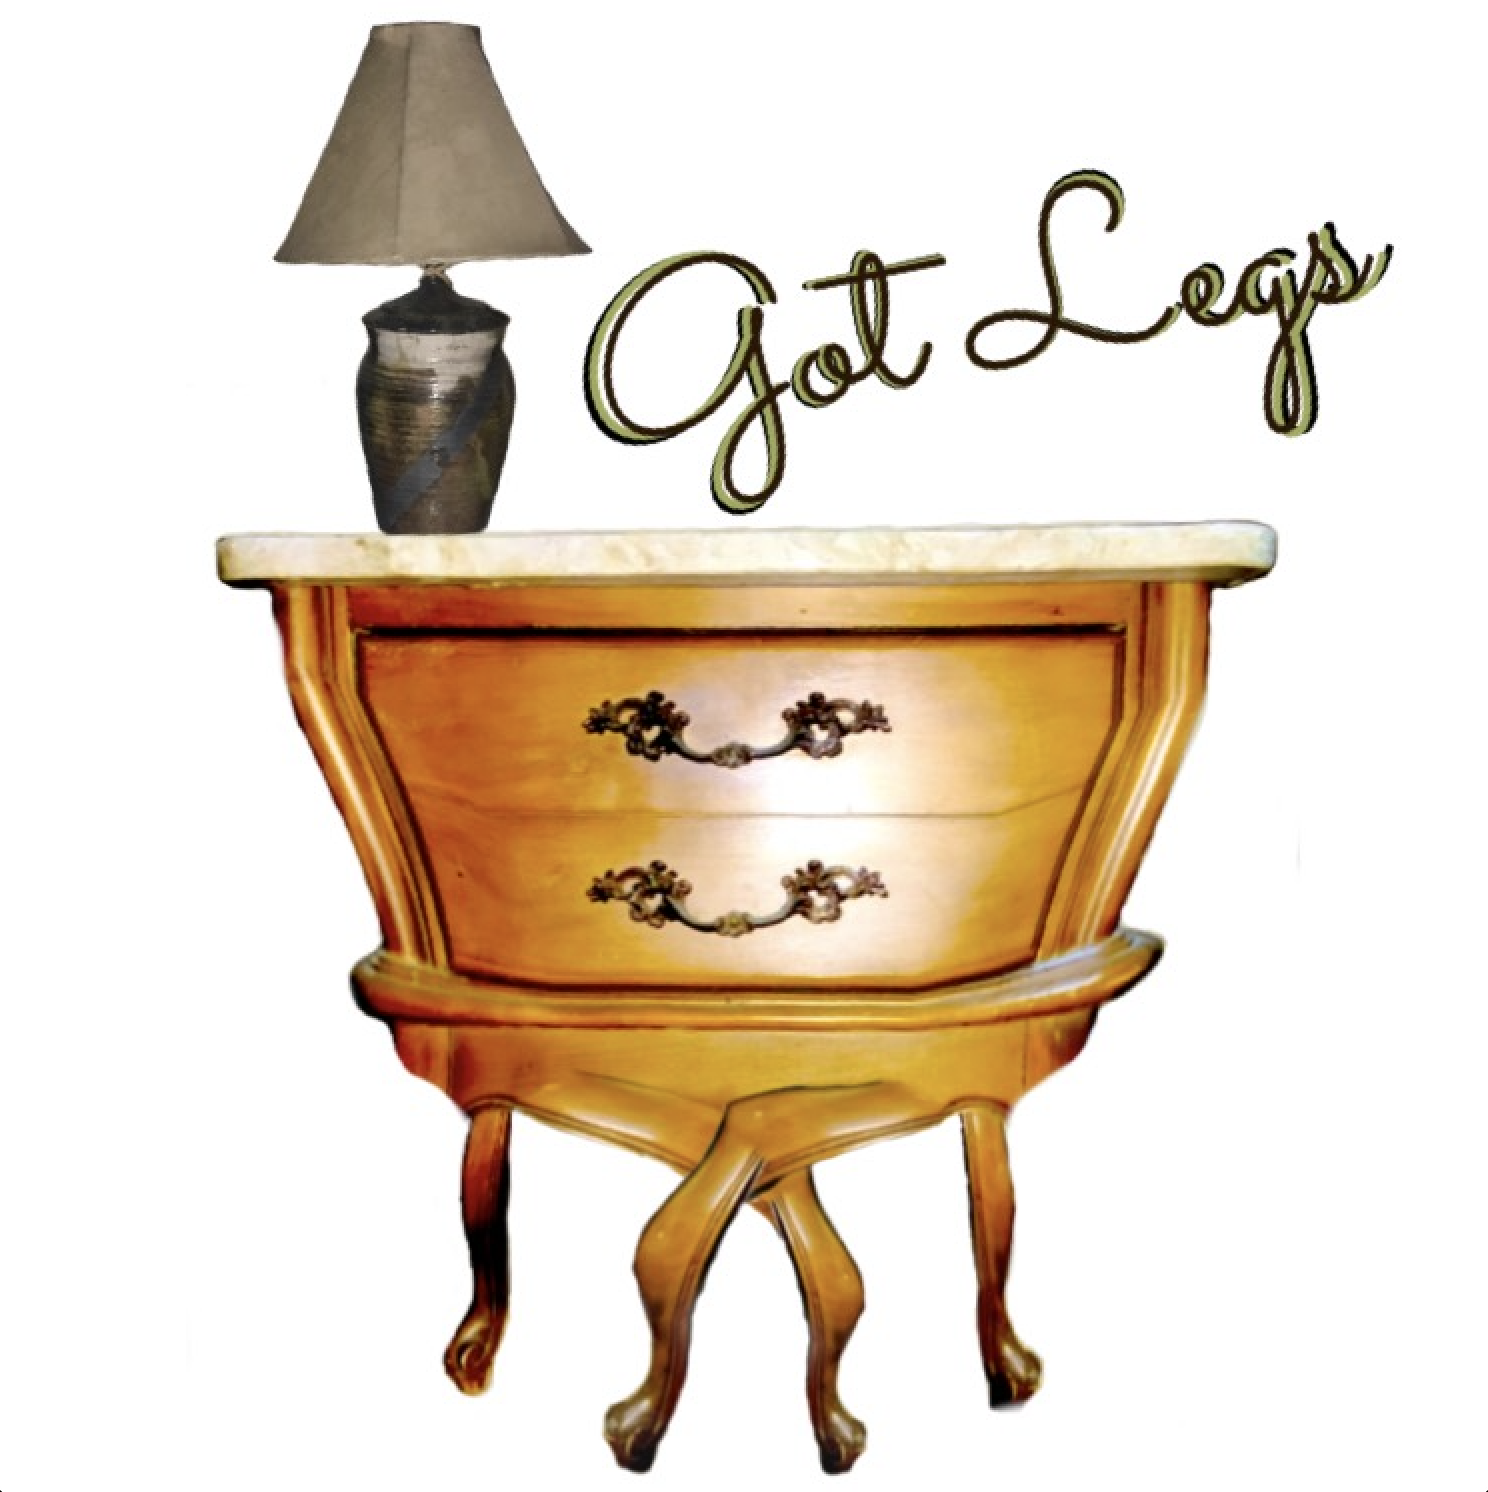 Bridging AZ Announces the Opening of GOT LEGS Furniture & Décor, a Charity Store for Gently Used Home Furniture and Decor Items